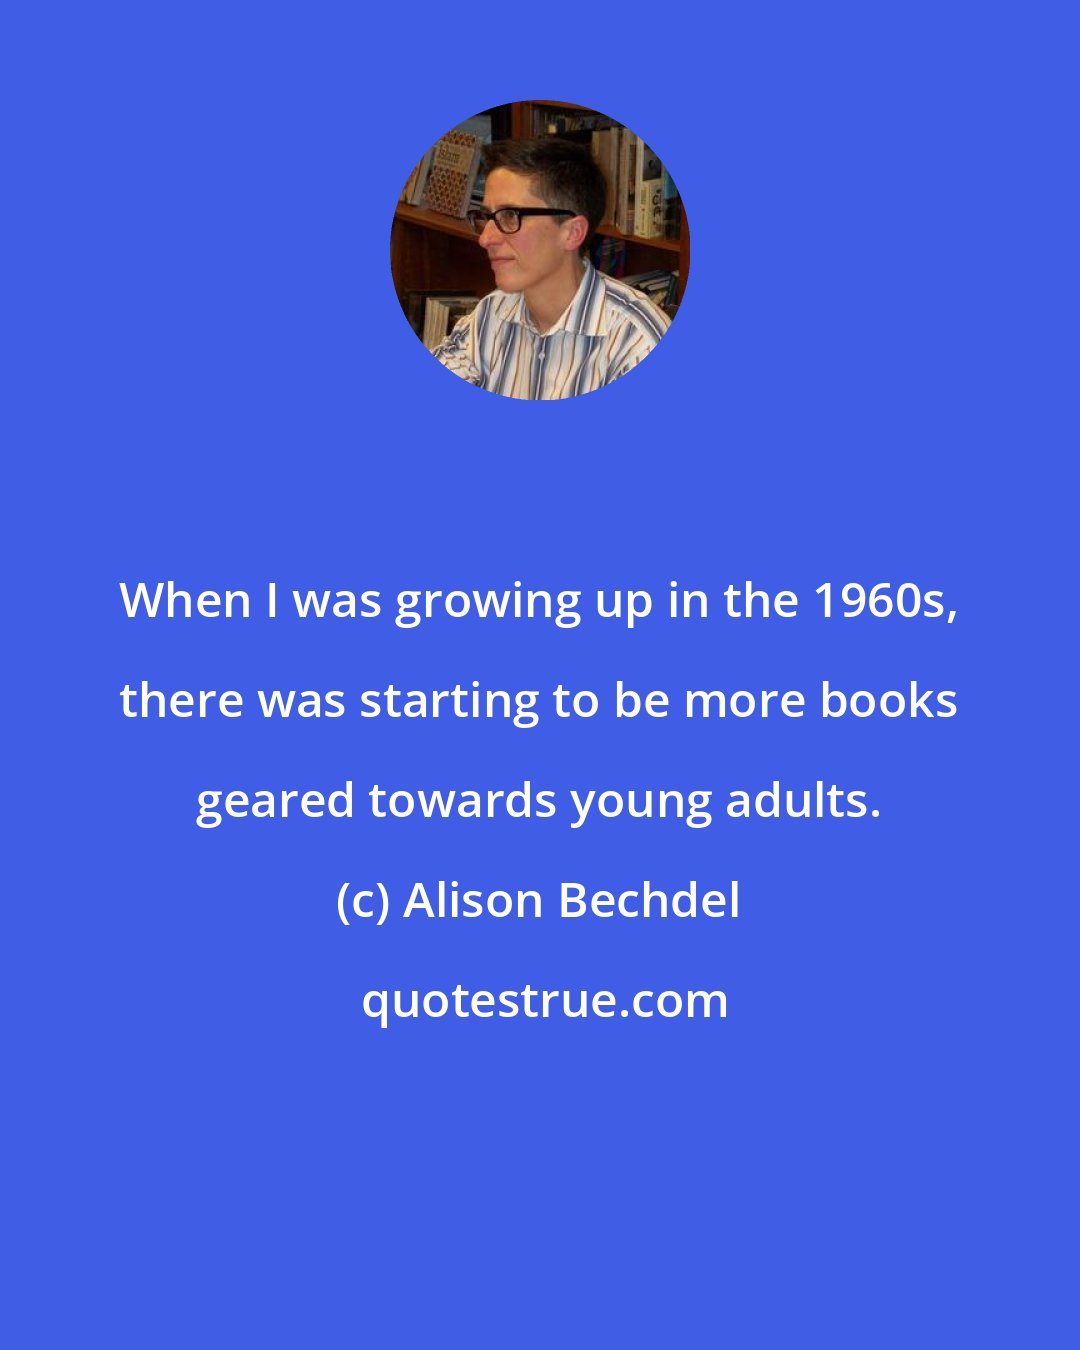 Alison Bechdel: When I was growing up in the 1960s, there was starting to be more books geared towards young adults.